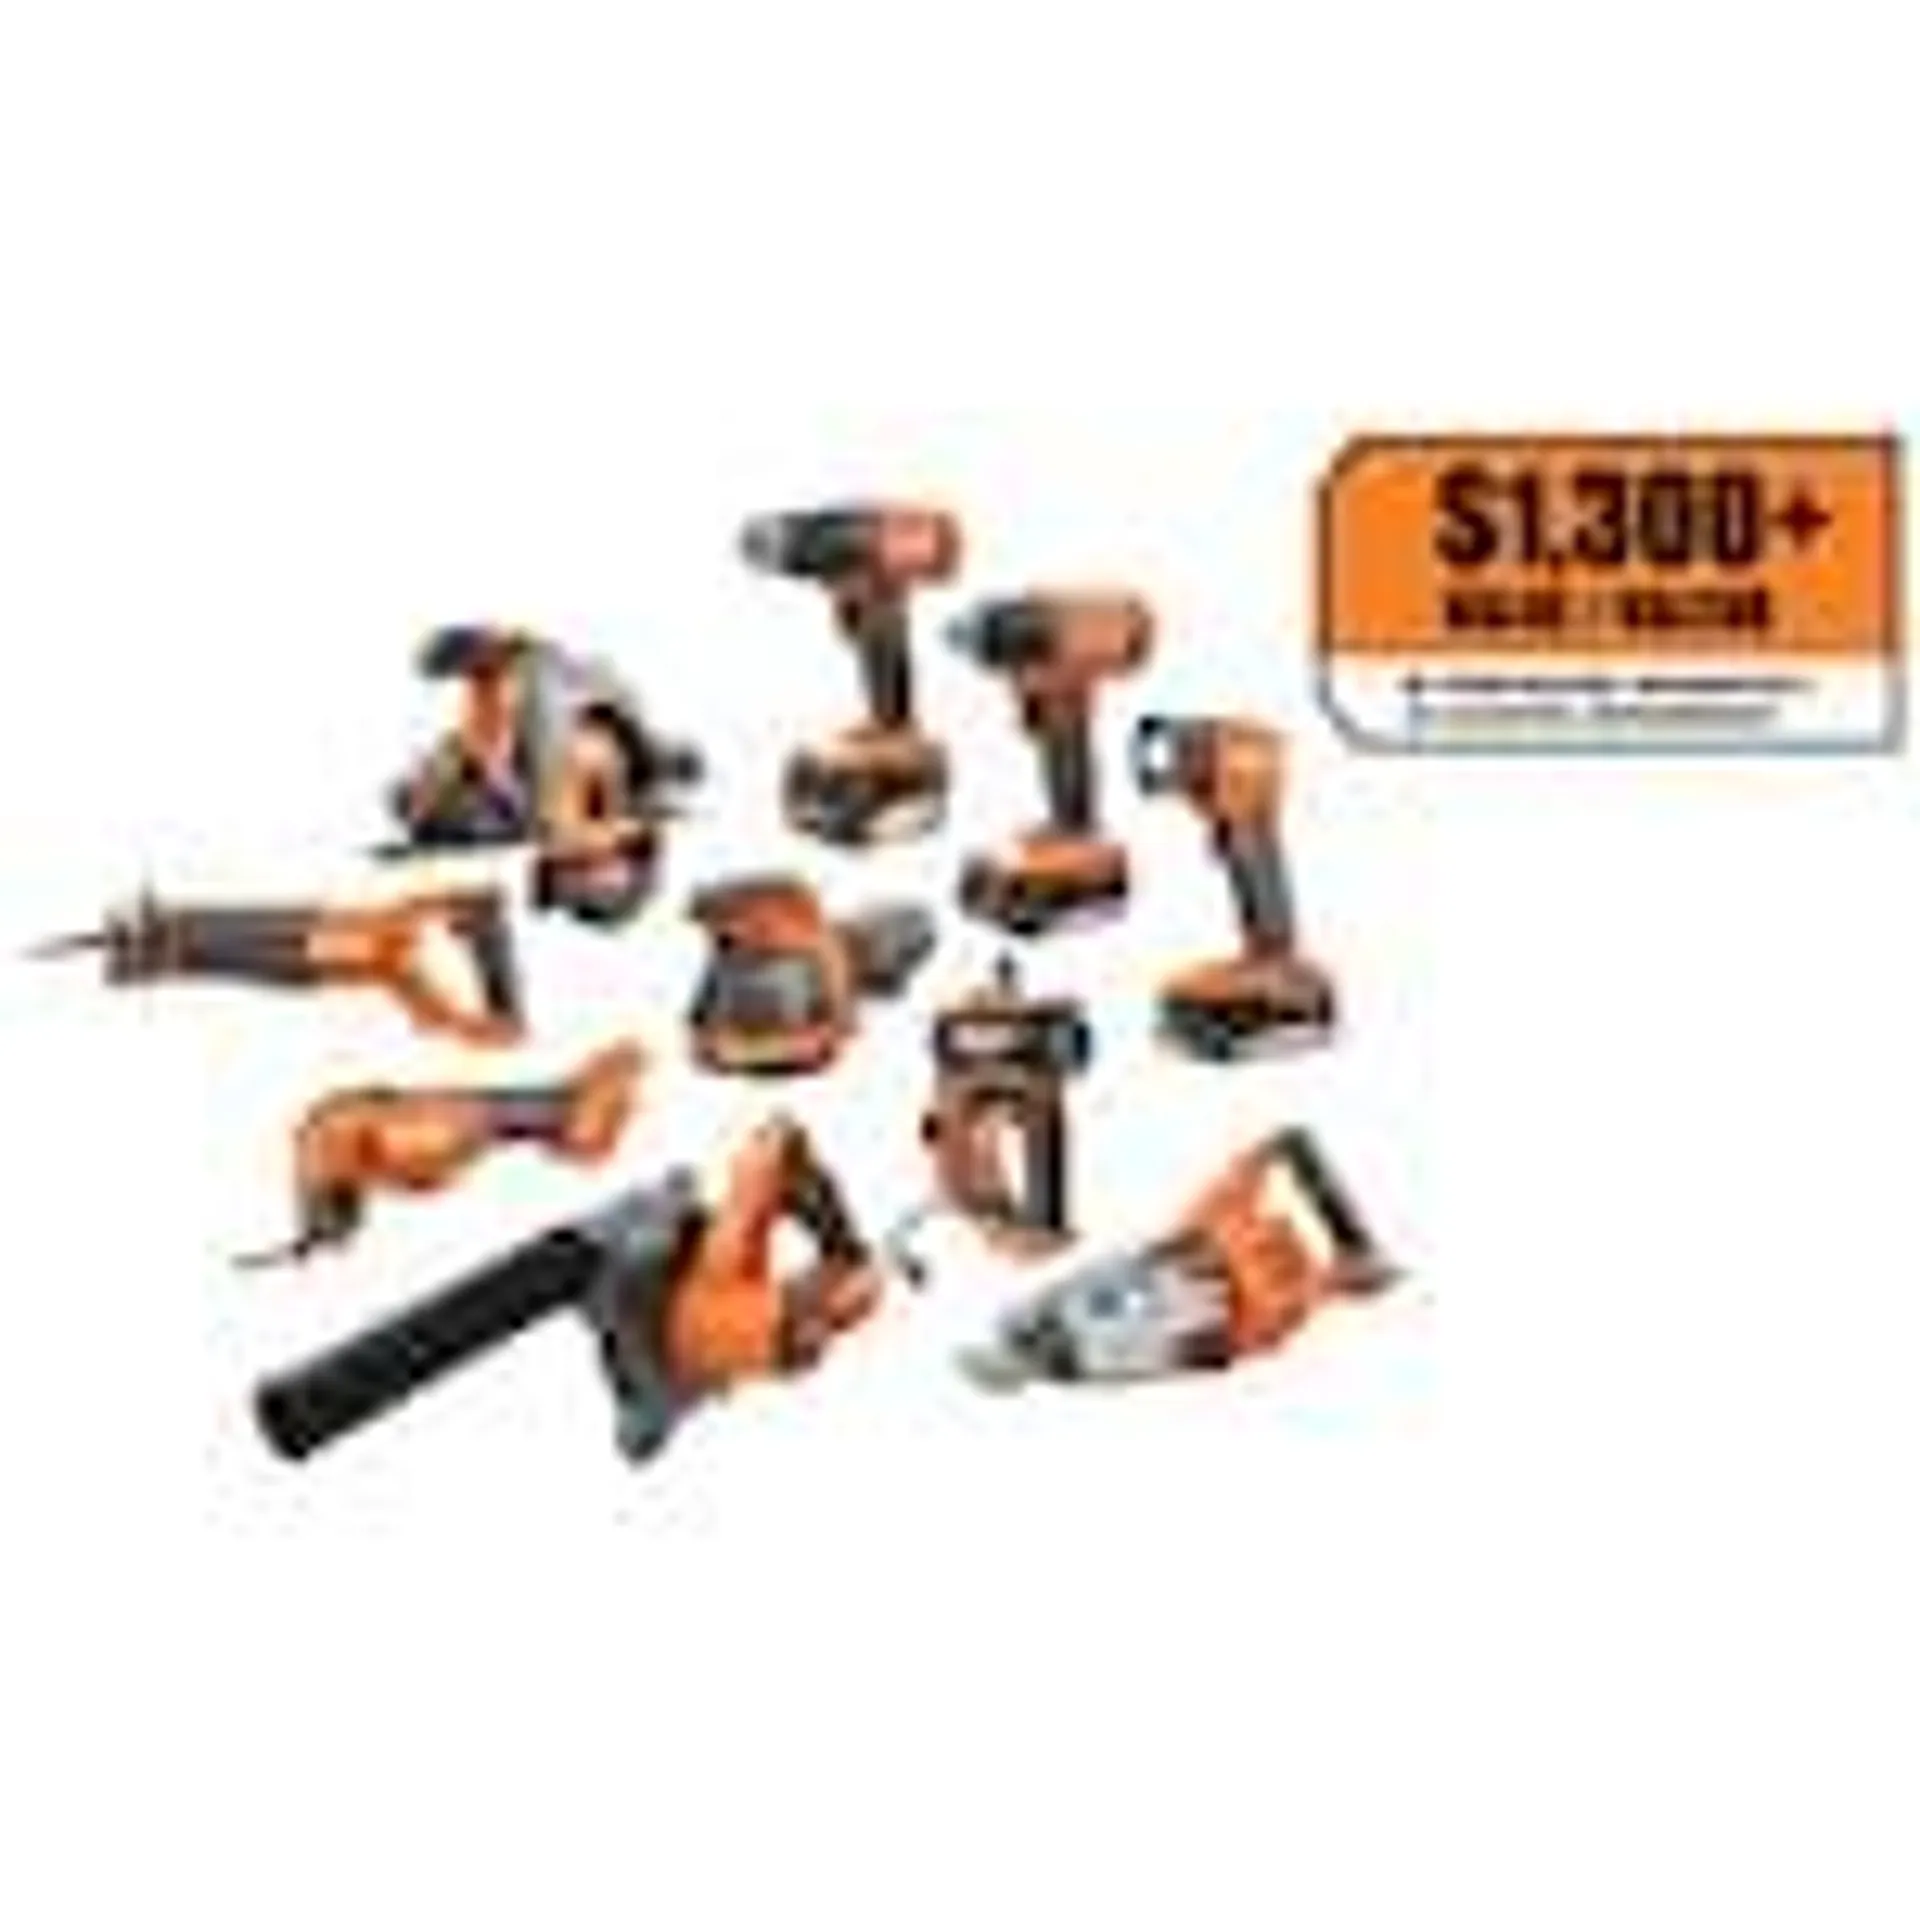 18V Cordless 10-Tool Kit with (2) 2.0 Ah Battery, (1) 4.0 Ah Battery, Charger, and Bag